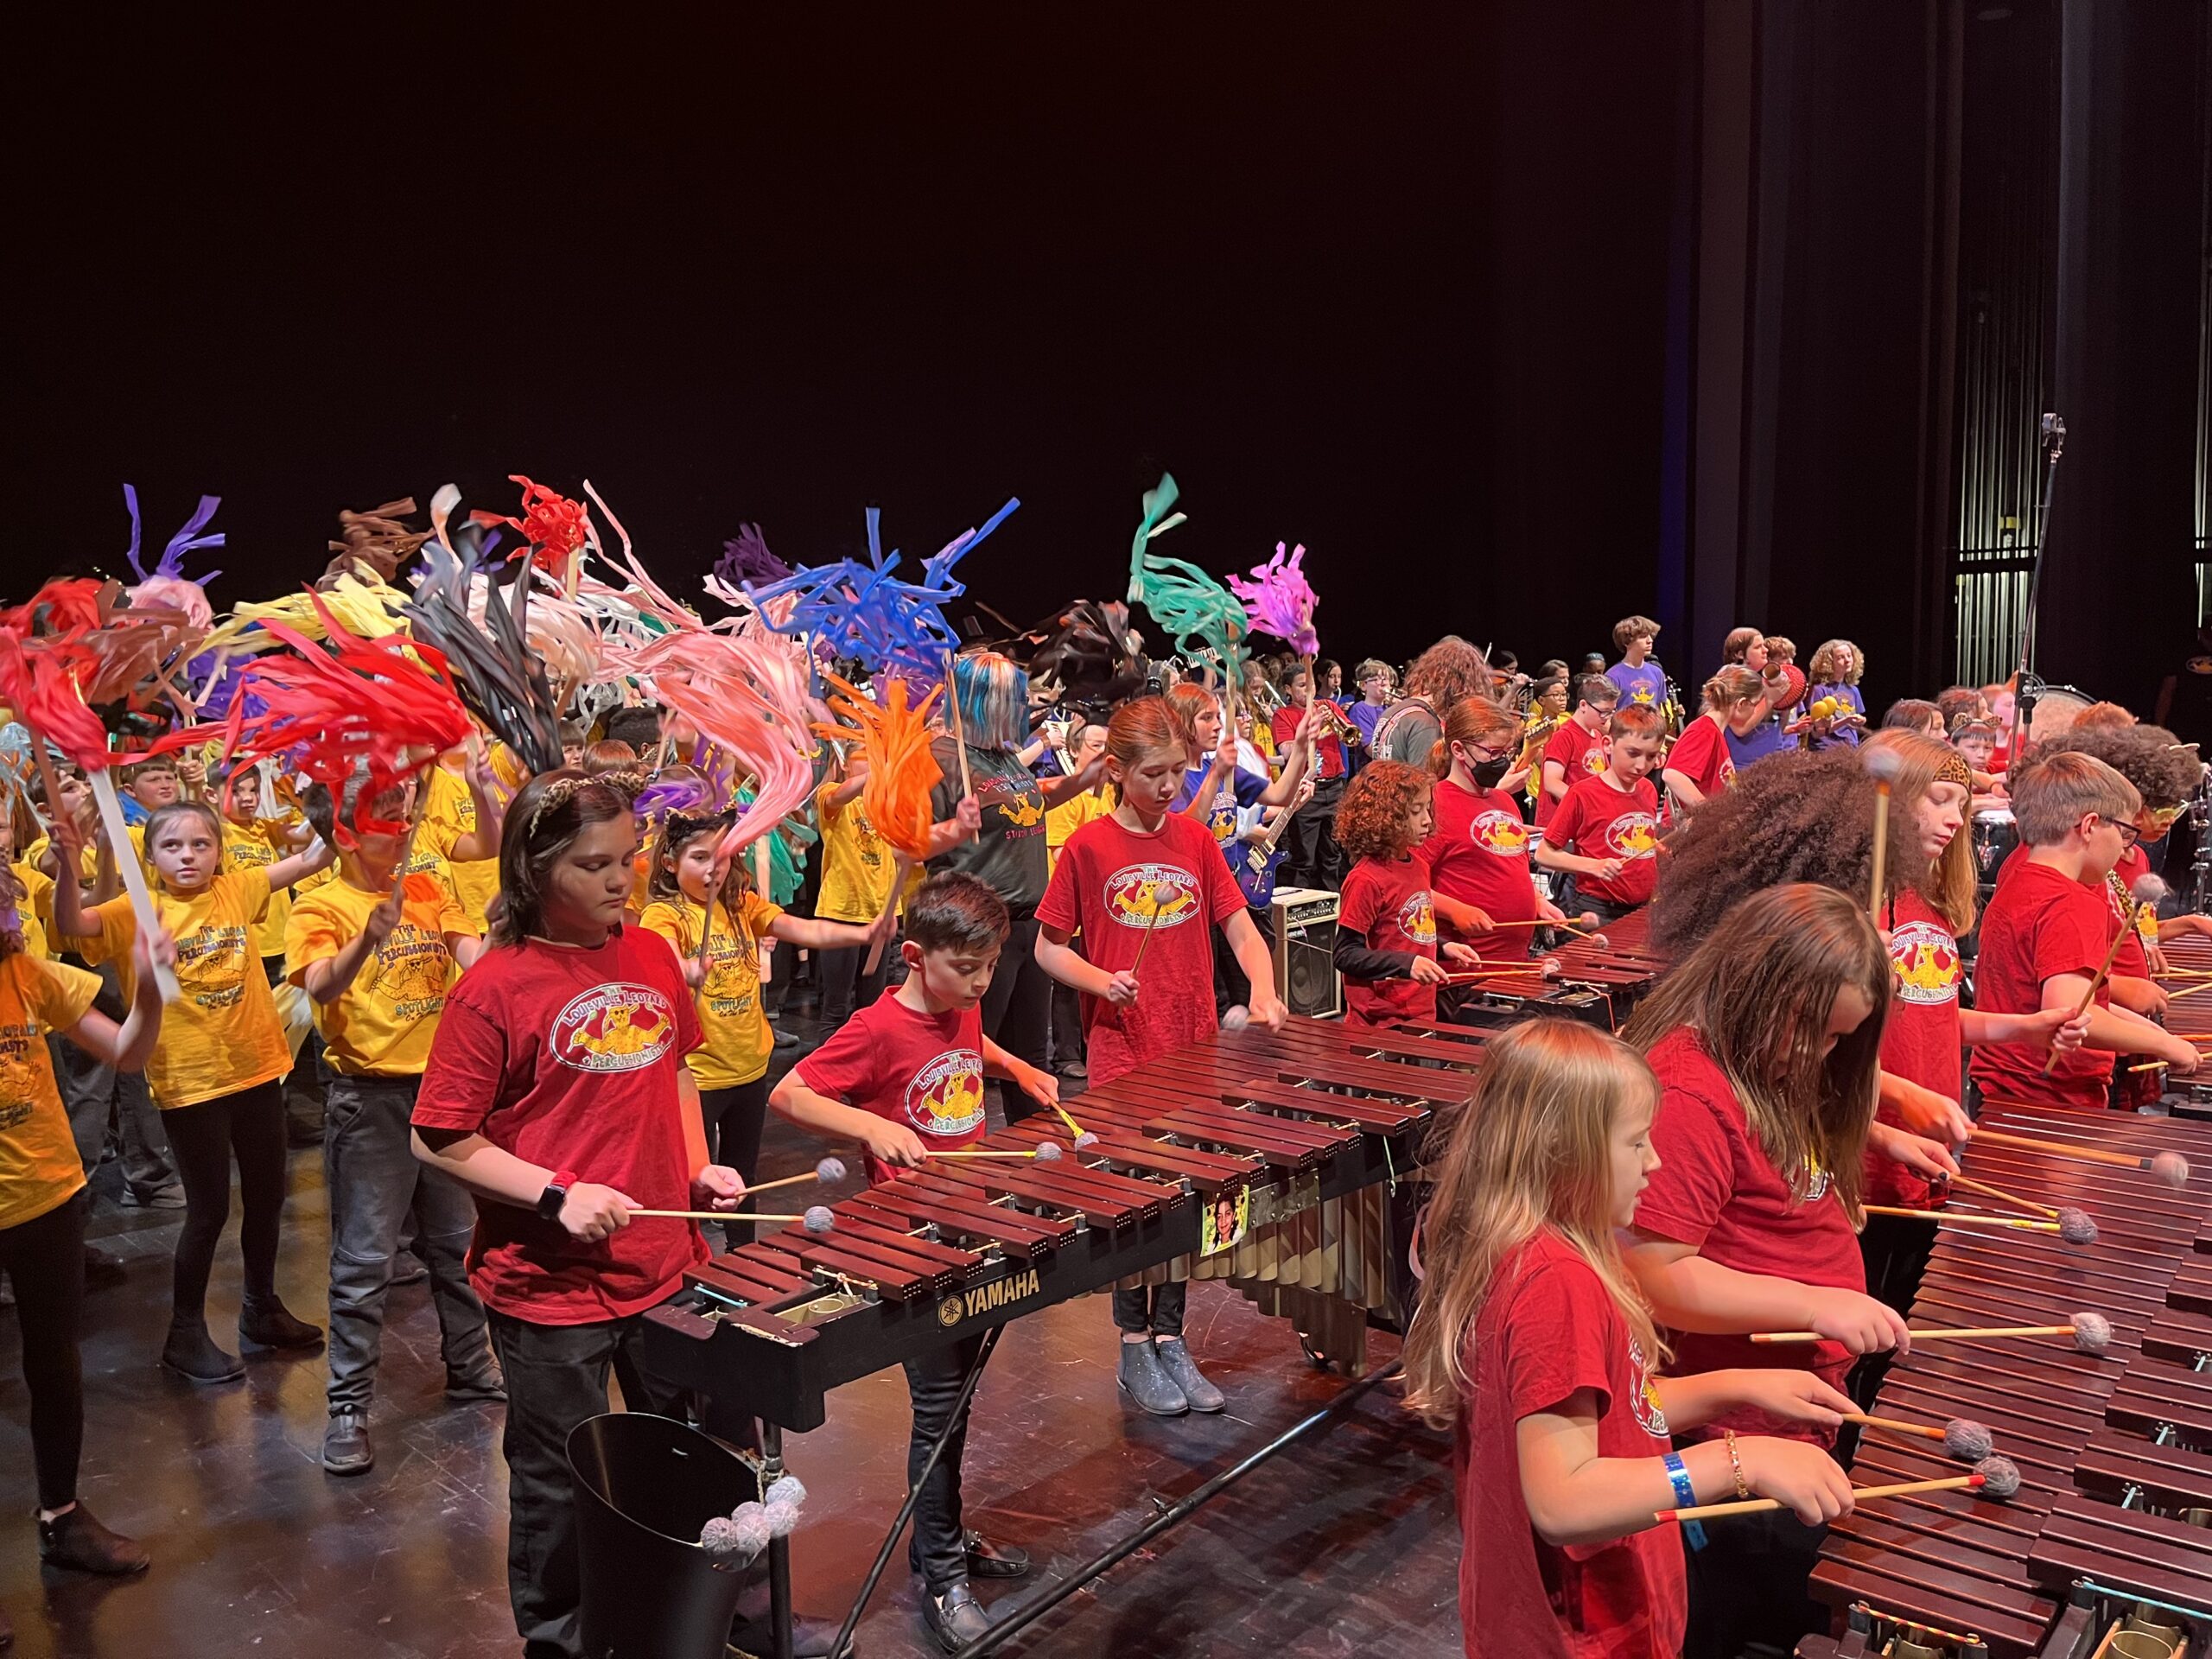 Louisville Leopards Percussionists performing in an auditorium.